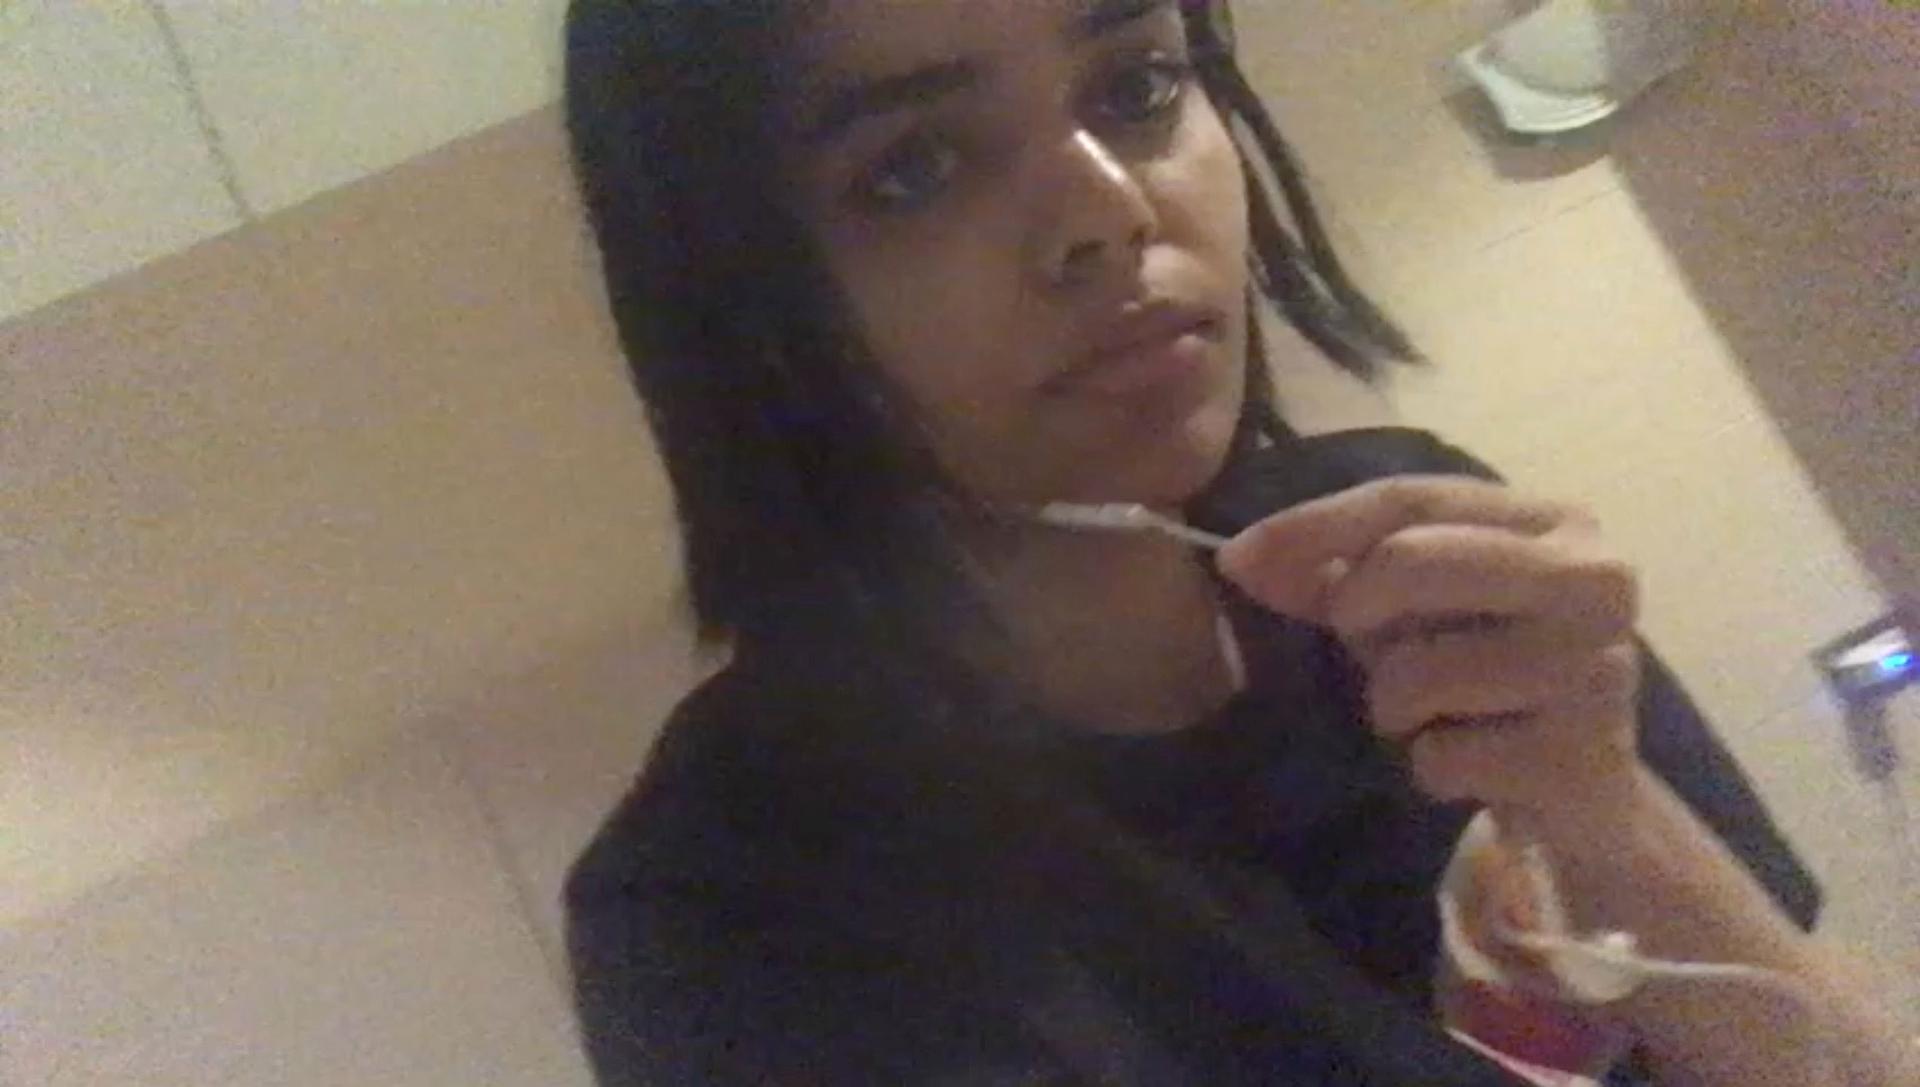 Rahaf Mohammed al-Qunun is shown in a still grainy still image taken from a video speaking into earbuds.